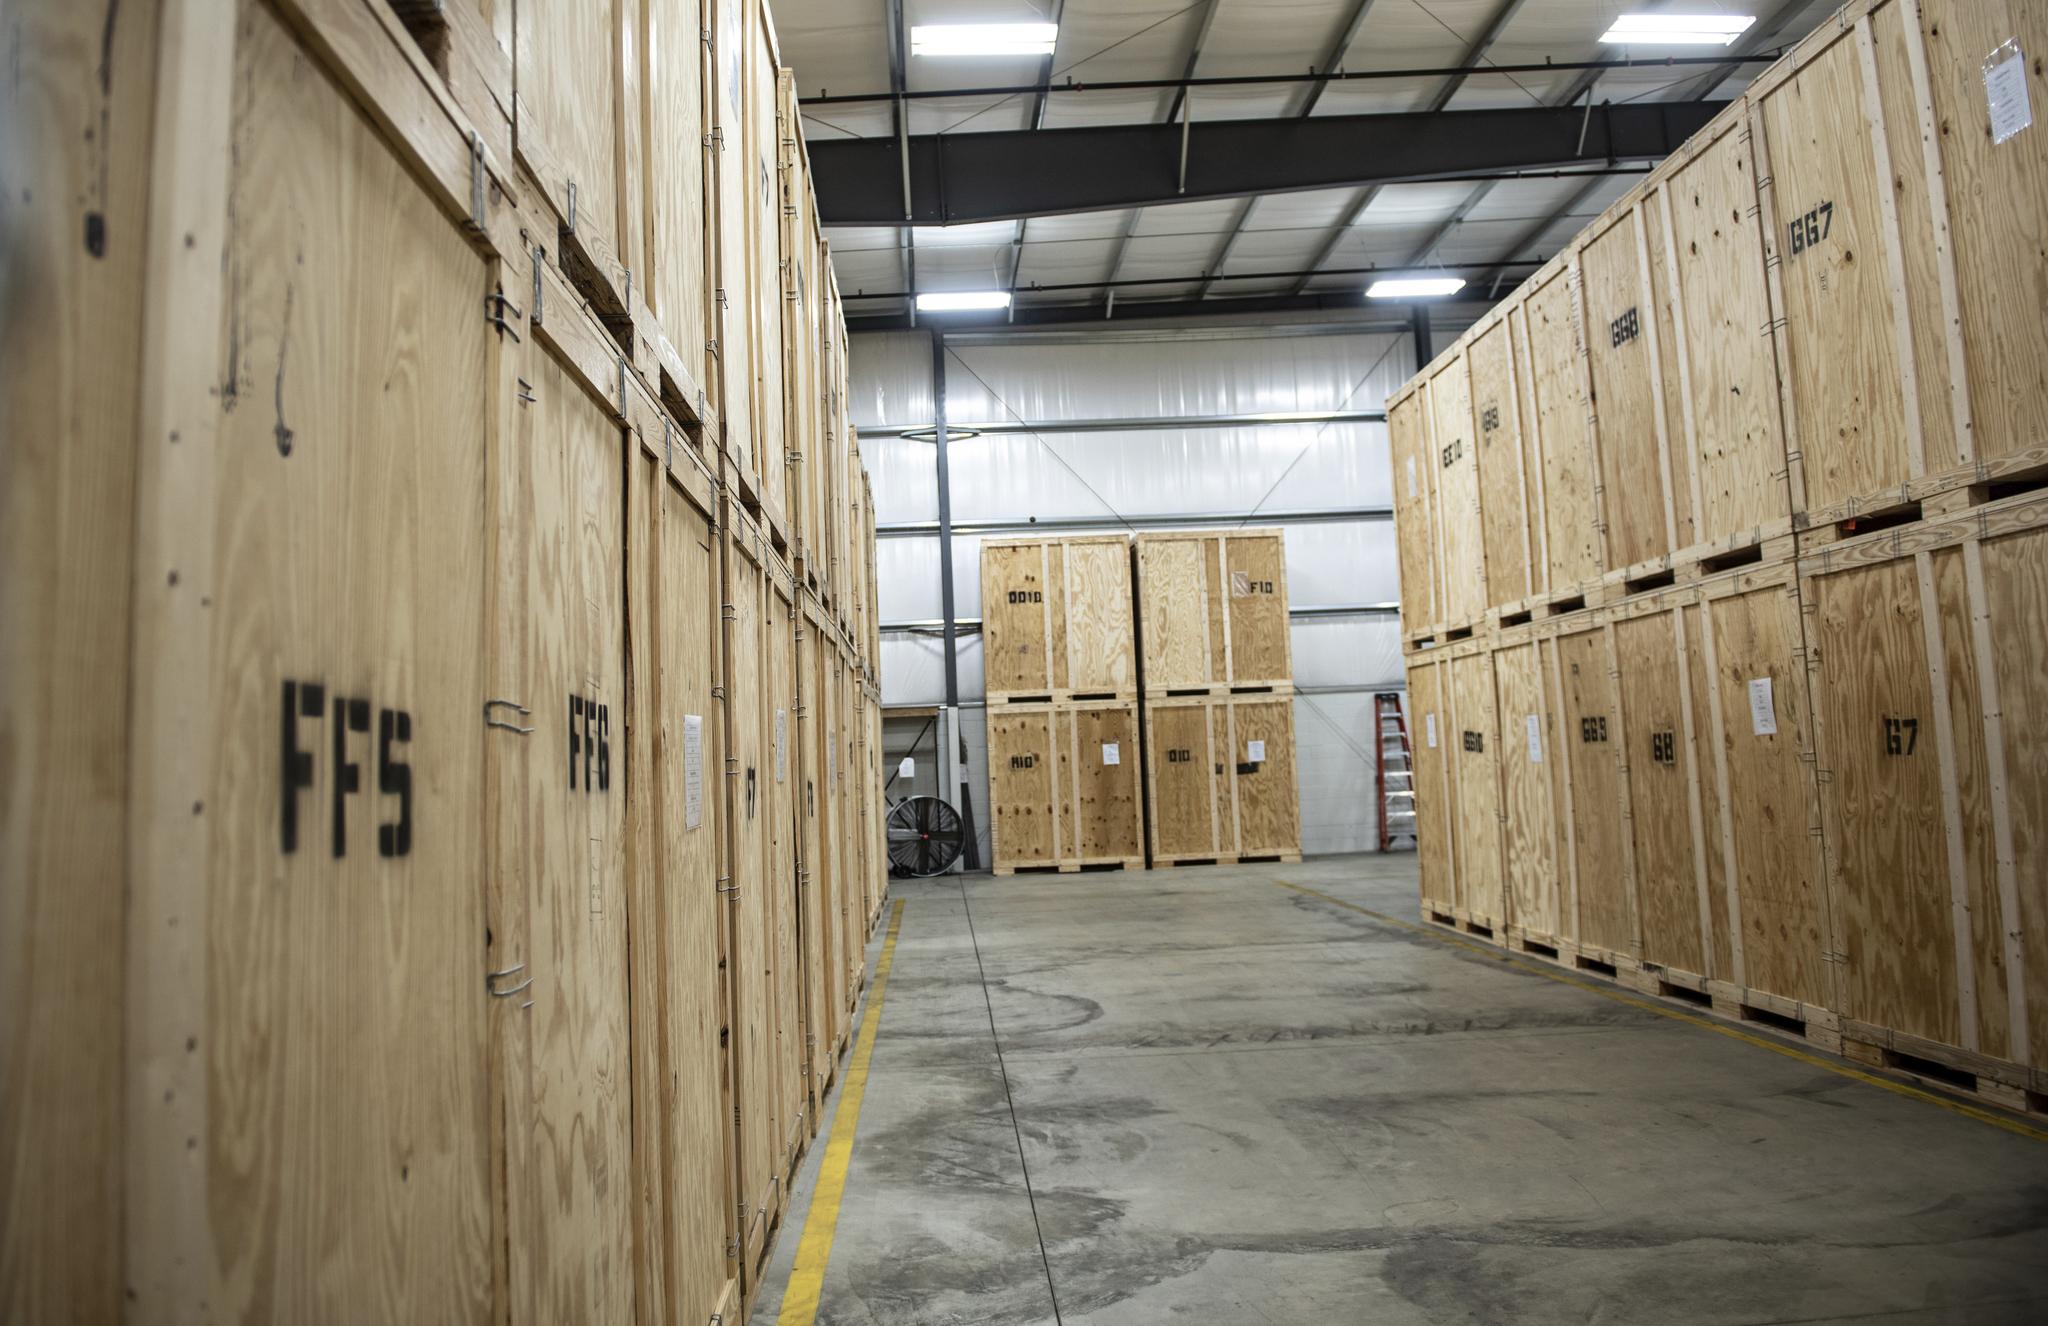 Storage facility showing climate regulated storage options